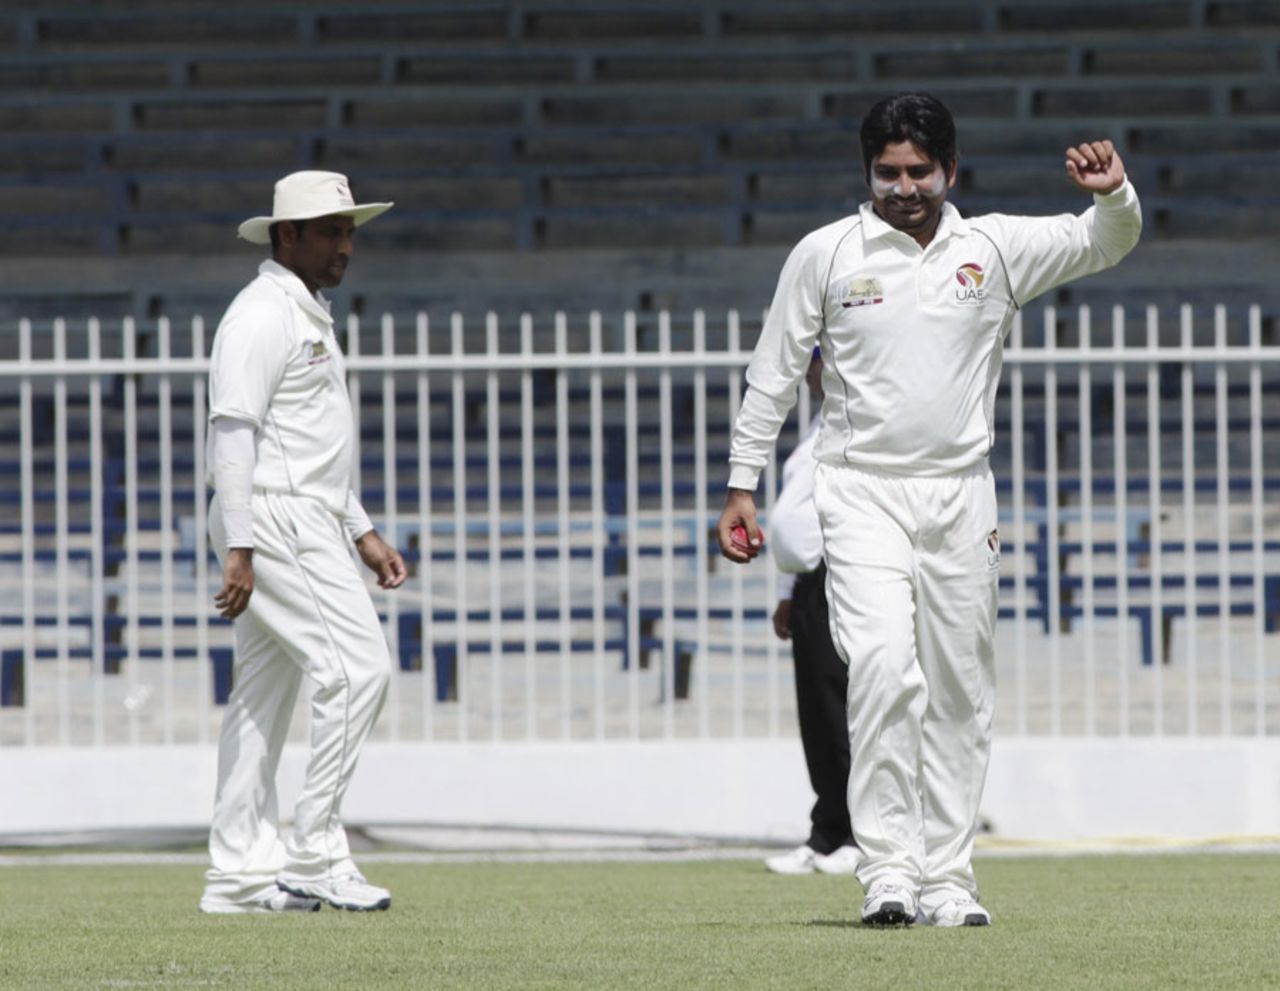 Fayyaz Ahmed celebrates a wicket, UAE v Afghanistan, Intercontinental Cup, Sharjah, 2nd day, October 6 2011